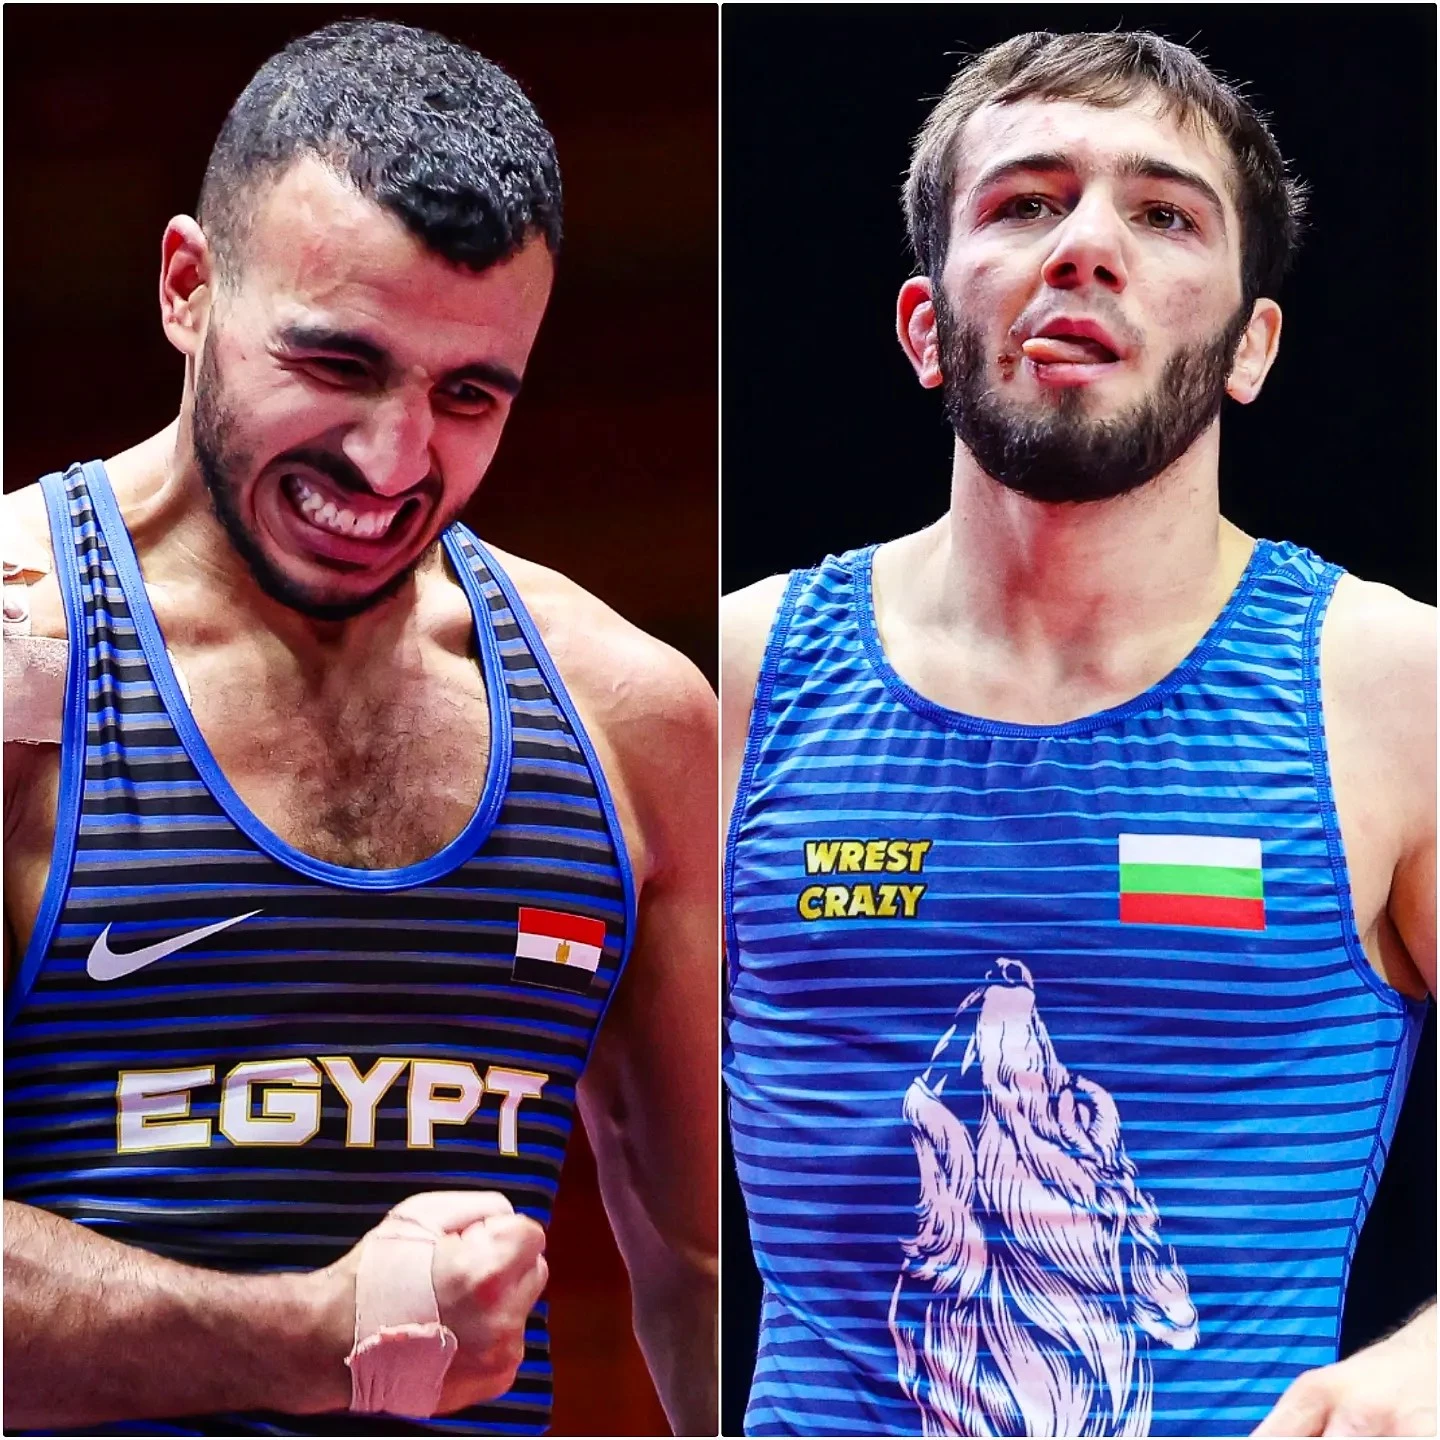 Olympic wrestler Mehmet Ibrahim Kisho, the son of the Academy, wins over Bulgarian Amayev iptevich 9/8, the bronze medalist of the European Championship for 2023-2024 and qualifies for the round of 16 of the world qualifiers in Turkey qualifying for the Paris Olympics